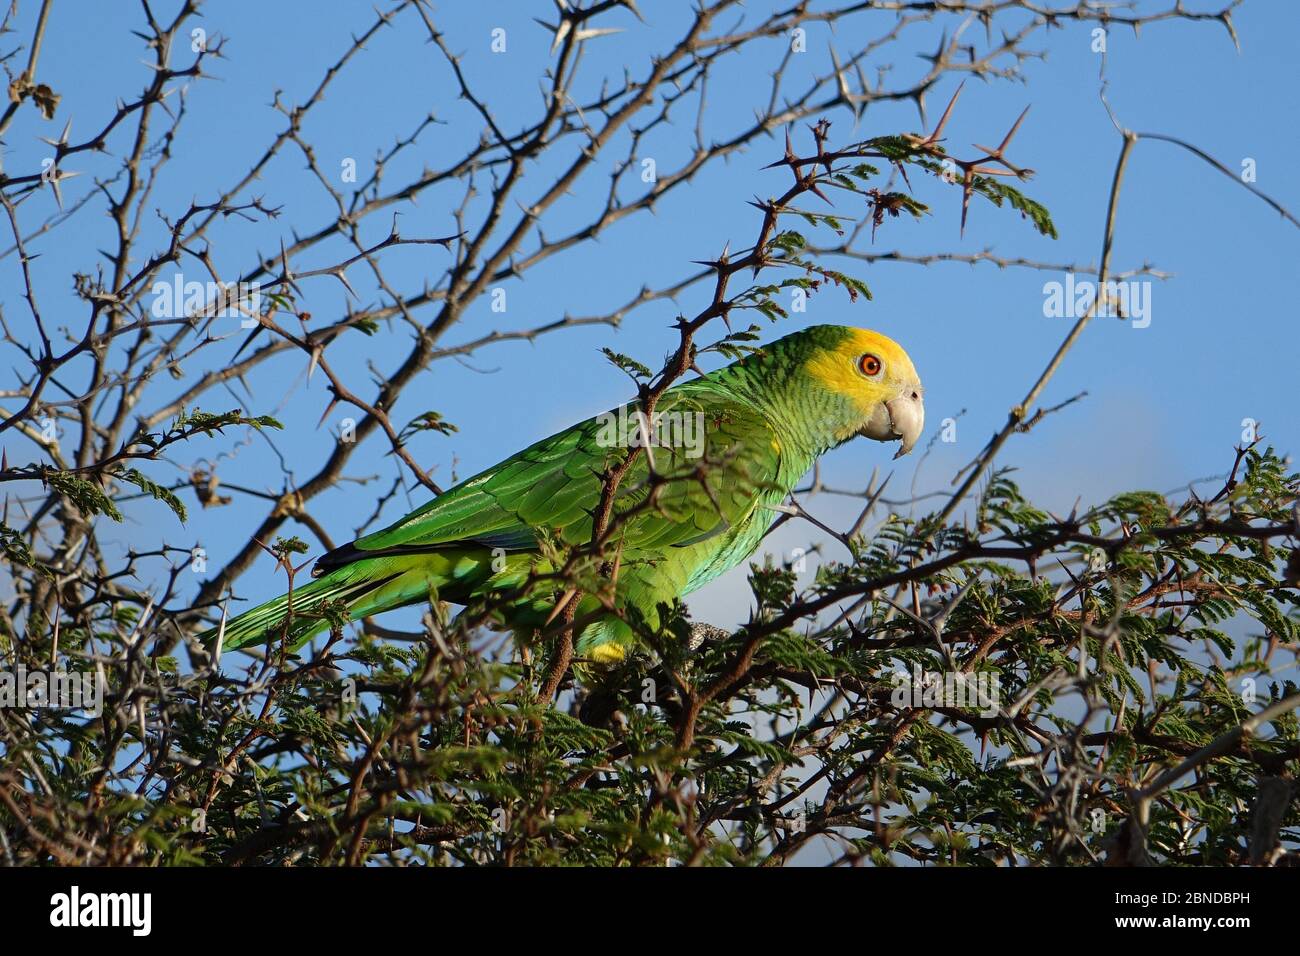 Wild yellow shouldered parrot sitting in a tree, Bonaire island, Caribbean Stock Photo